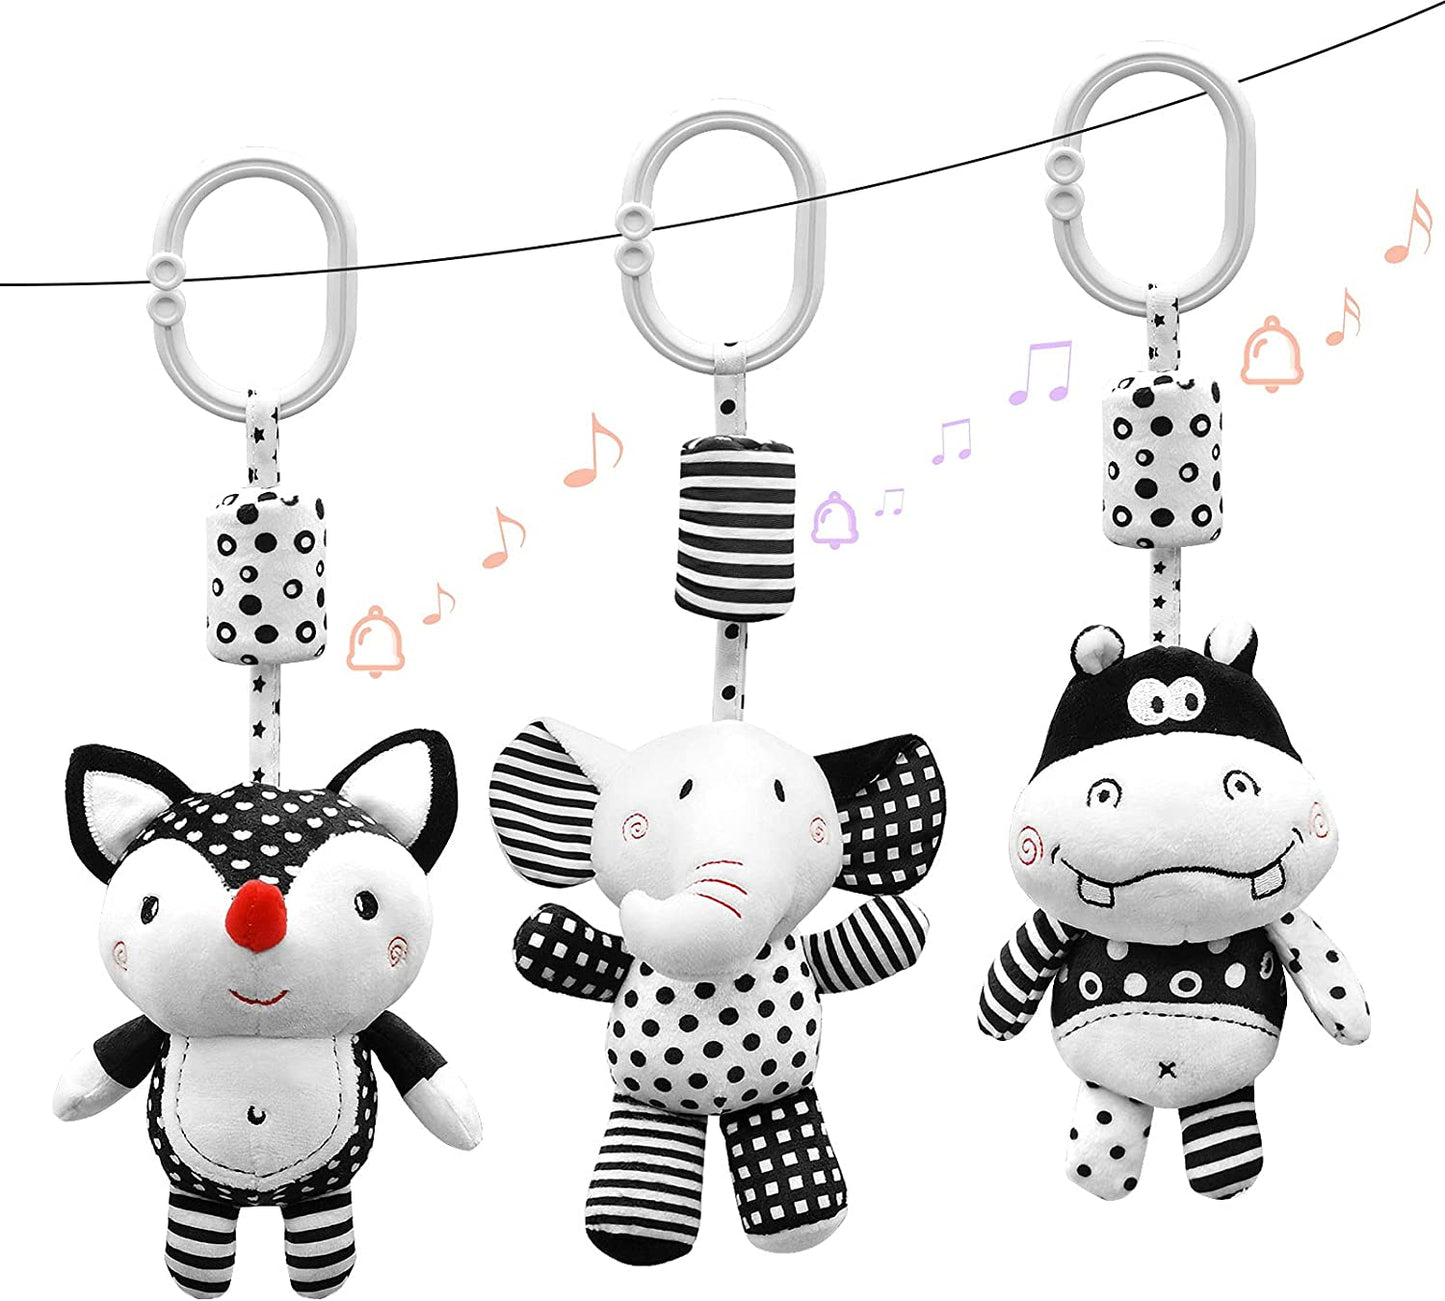 "Musical Hanging Toy Set for Babies - Stimulating Newborns with Soft Plush Rattles, Perfect for Strollers, Cribs, and Car Seats - Ideal Gift for Infants 0-18 Months (3 Pack)"